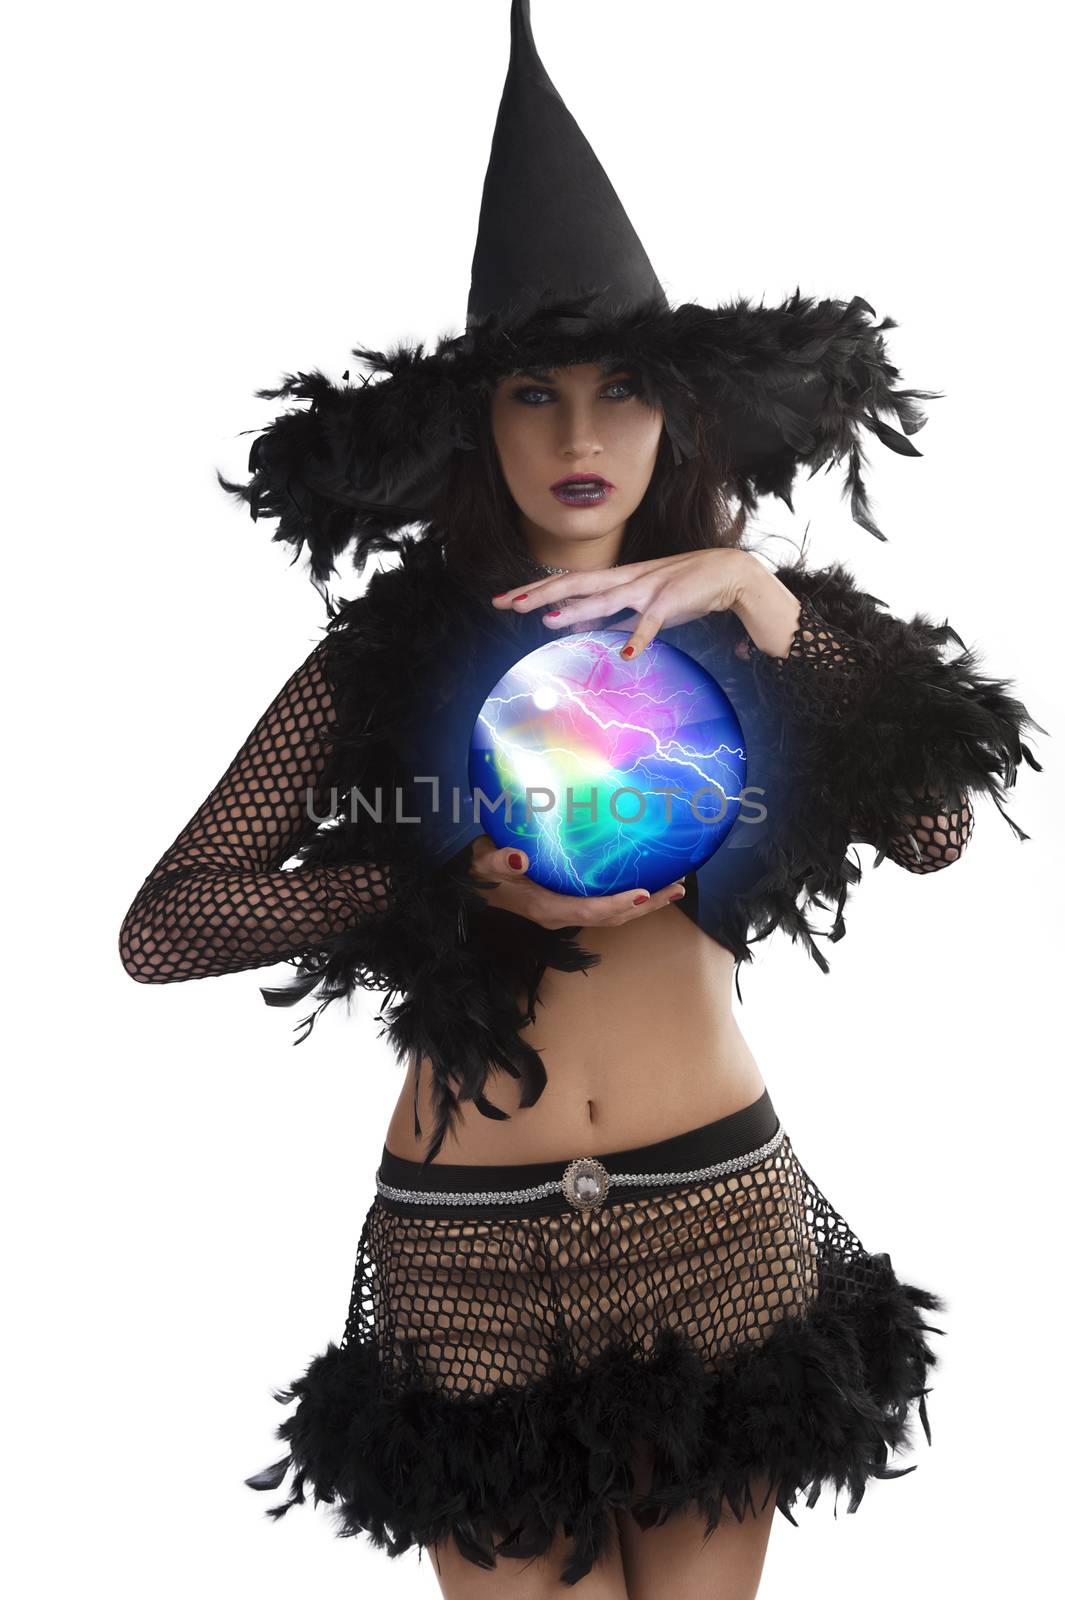 the young witch posing with magic ball by fotoCD